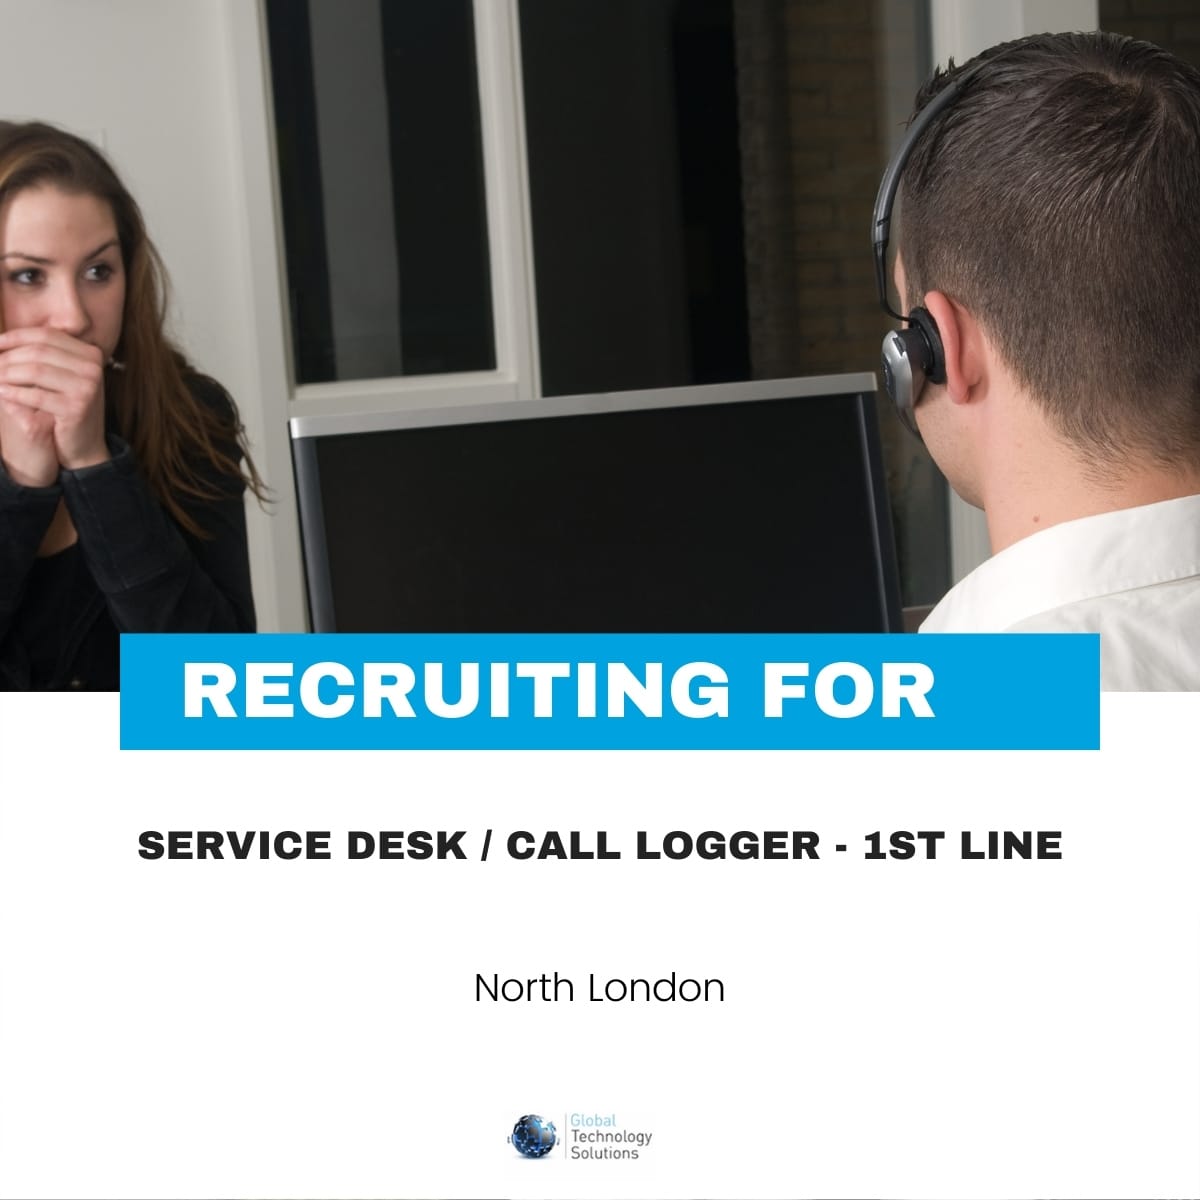 1st line support jobs in North London